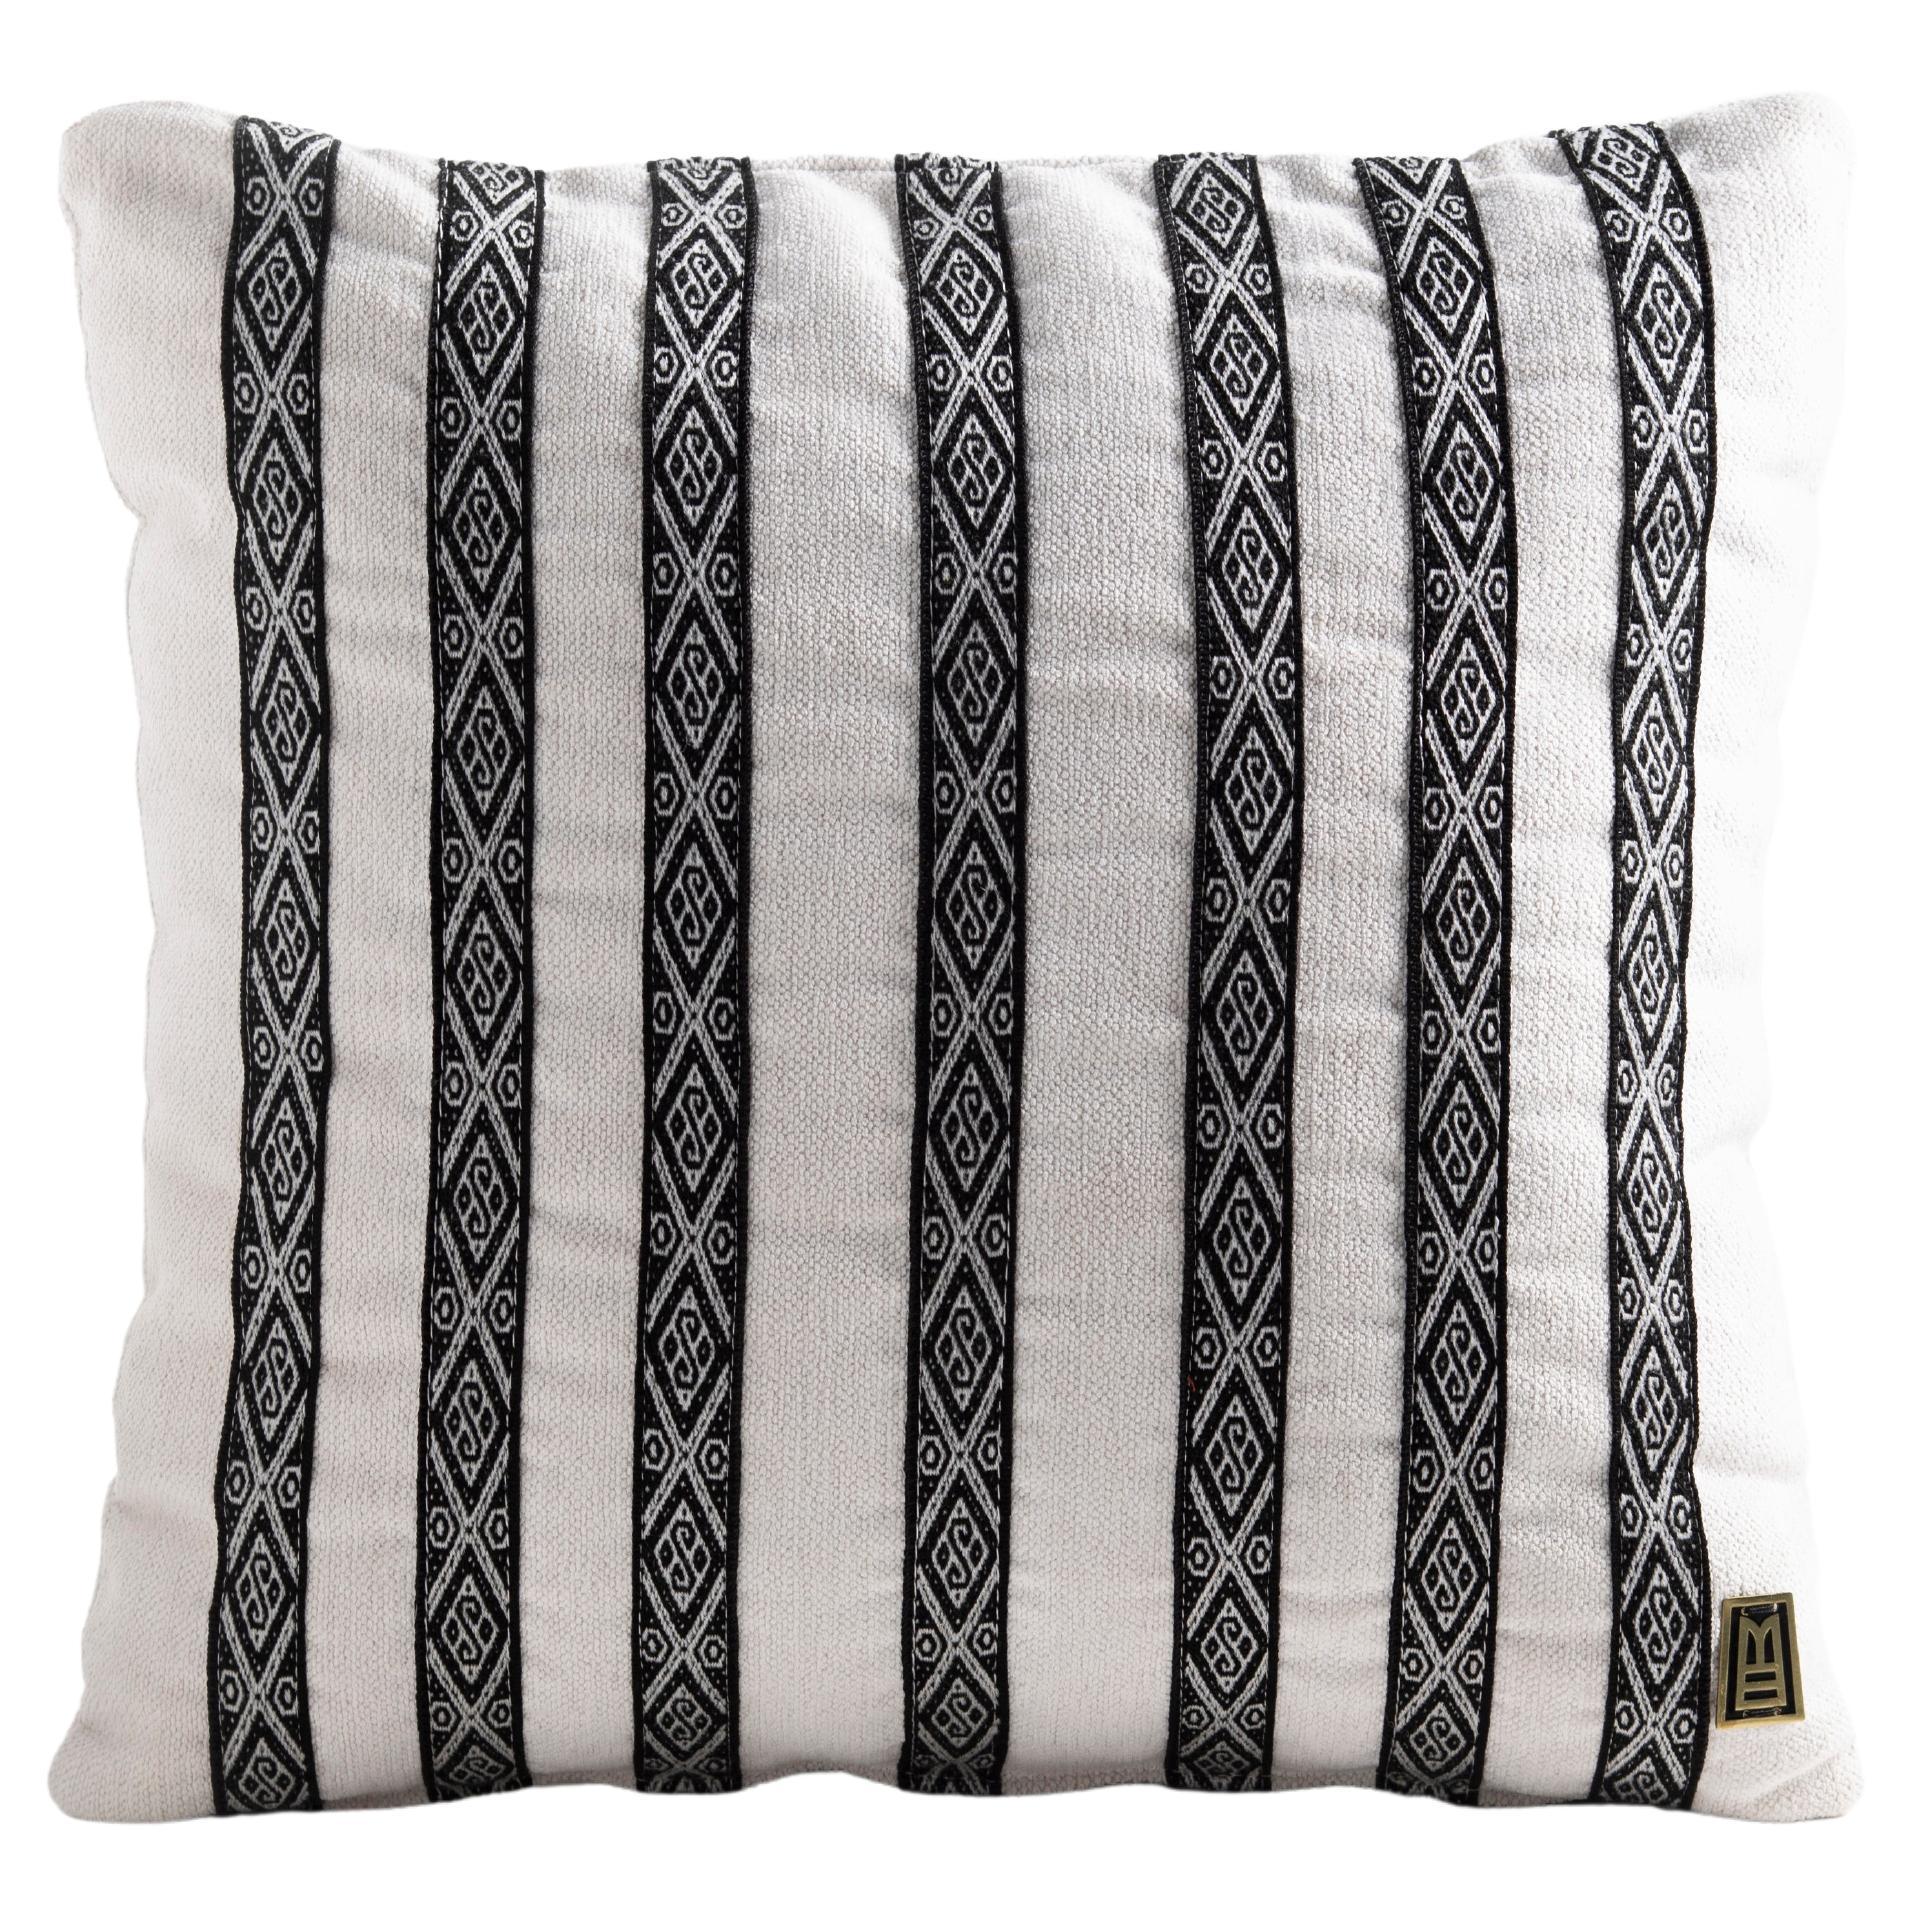 FAJAS Handwoven Artisanal Sash Pillow in Ivory Upholstery by ANDEAN, In Stock